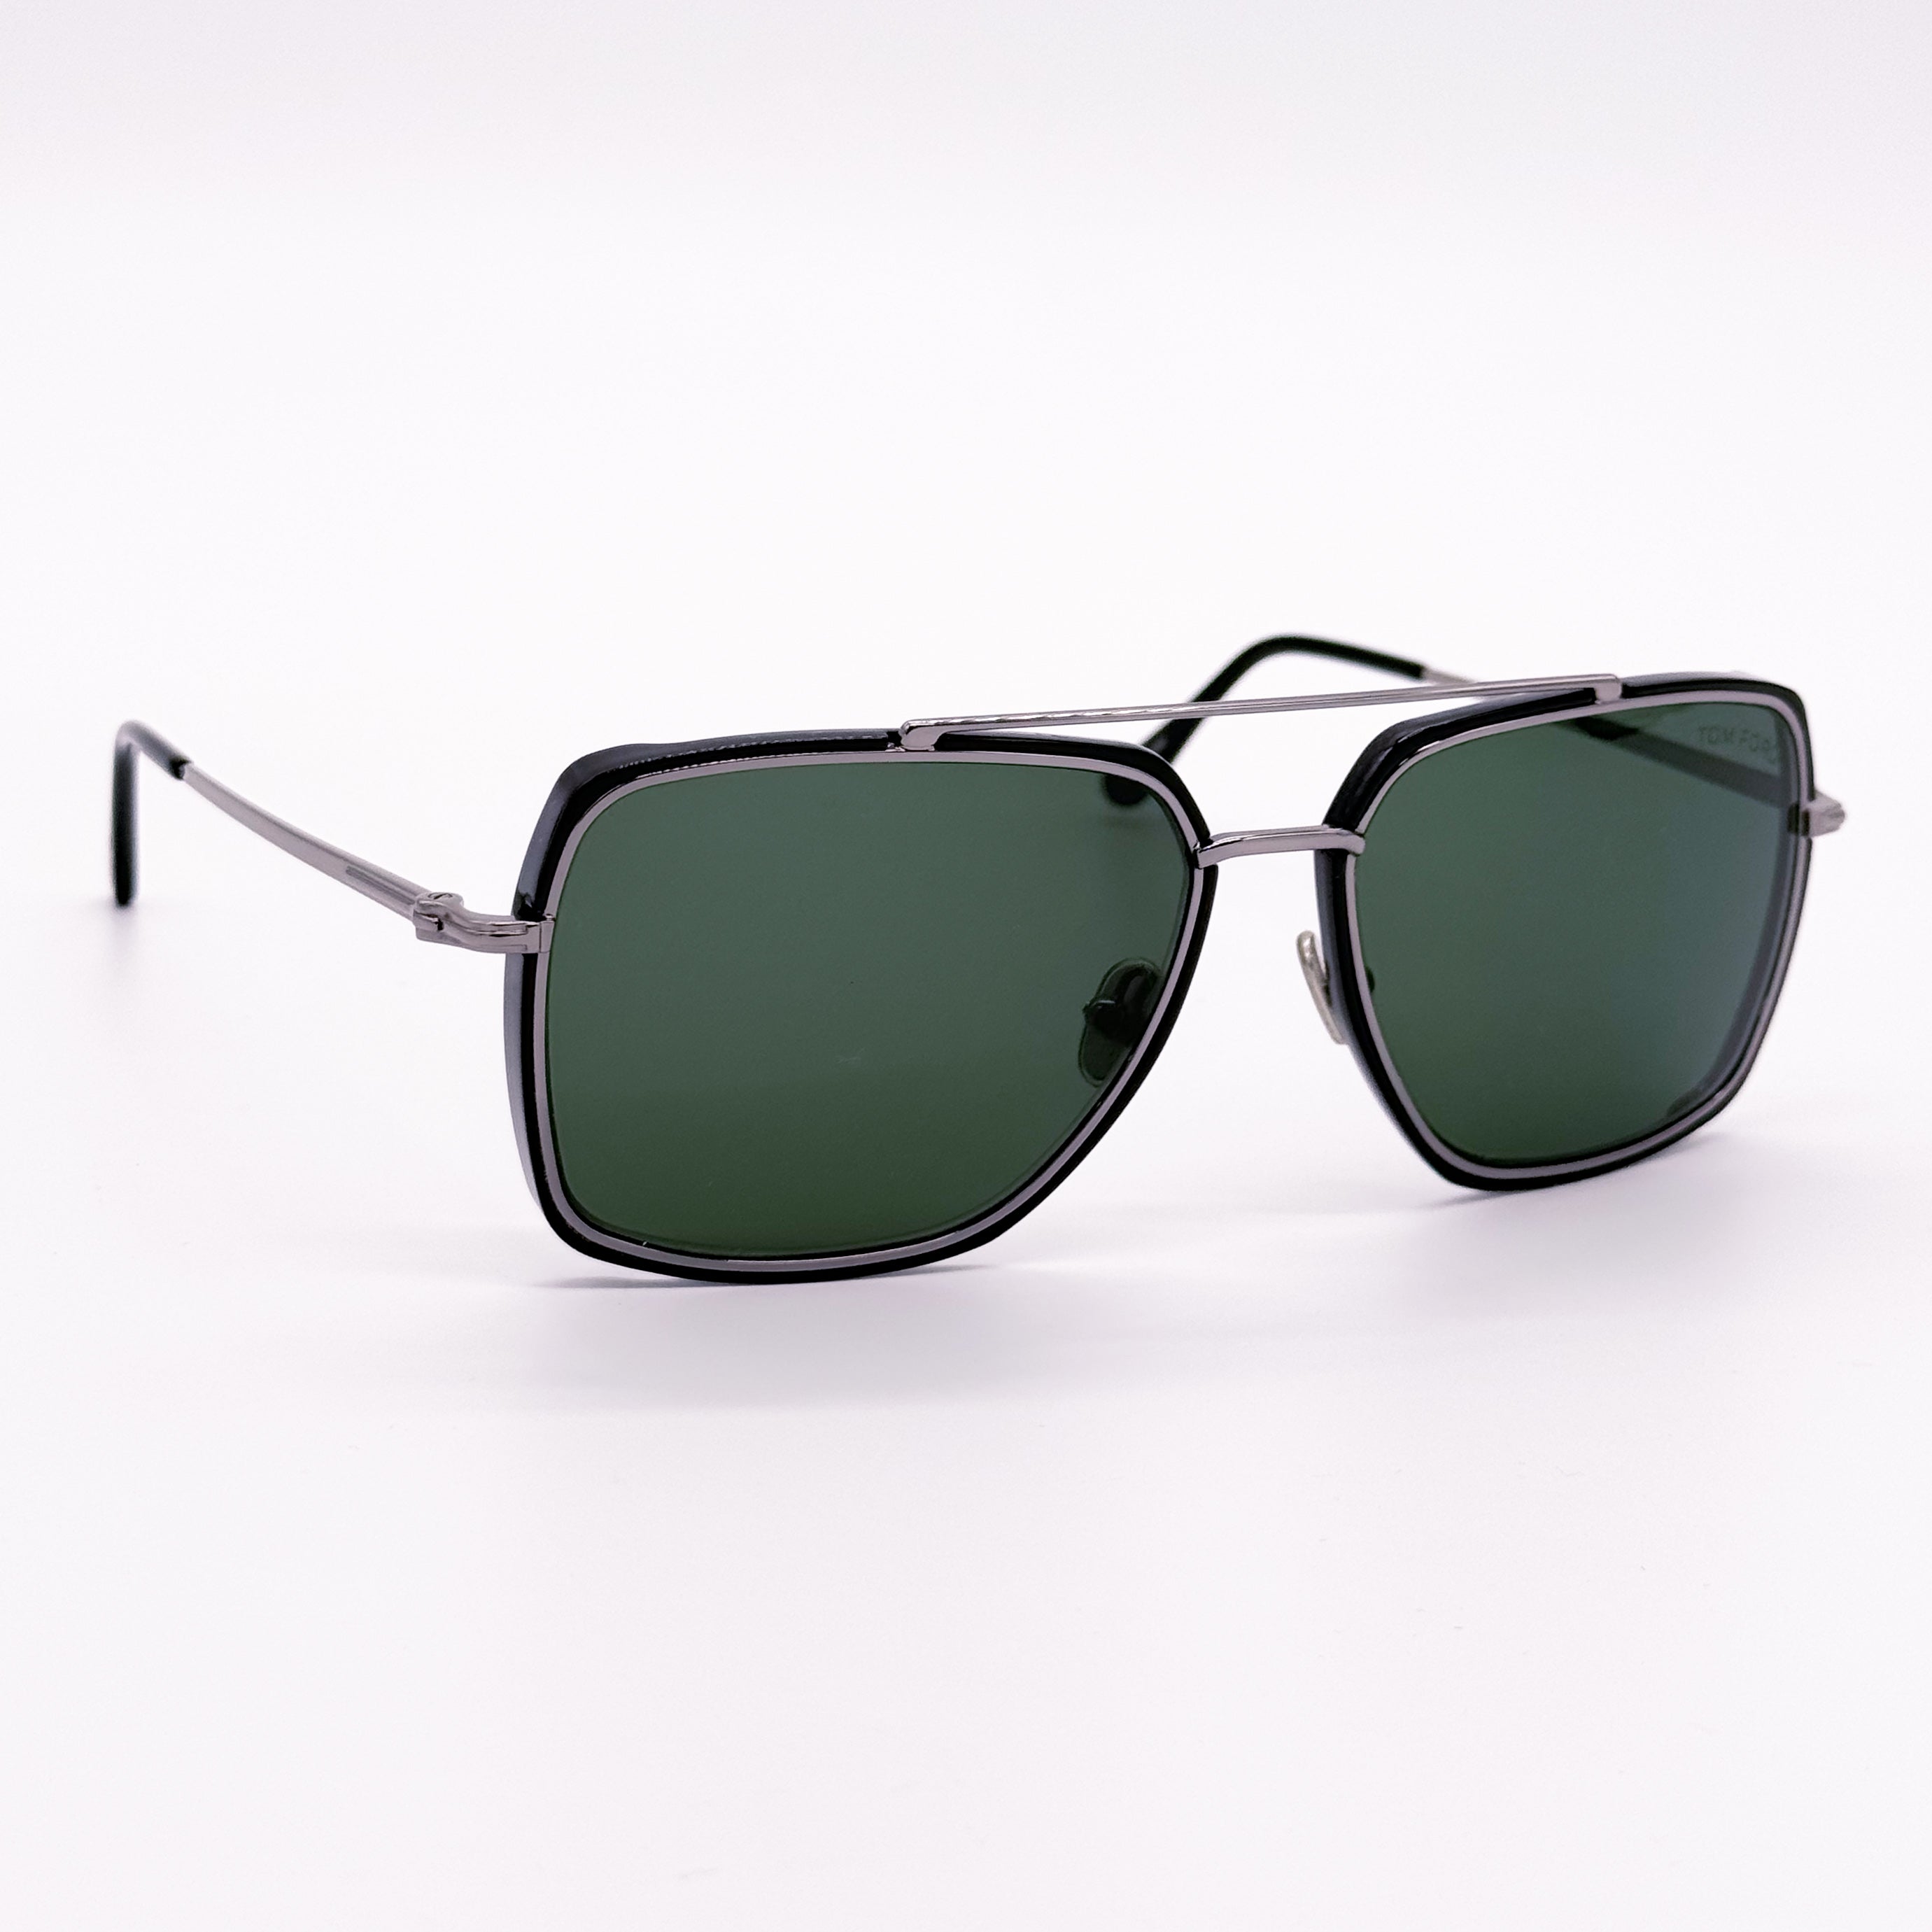 TOM FORD LIONEL TF750 01N SUNGLASSES FT0750/S